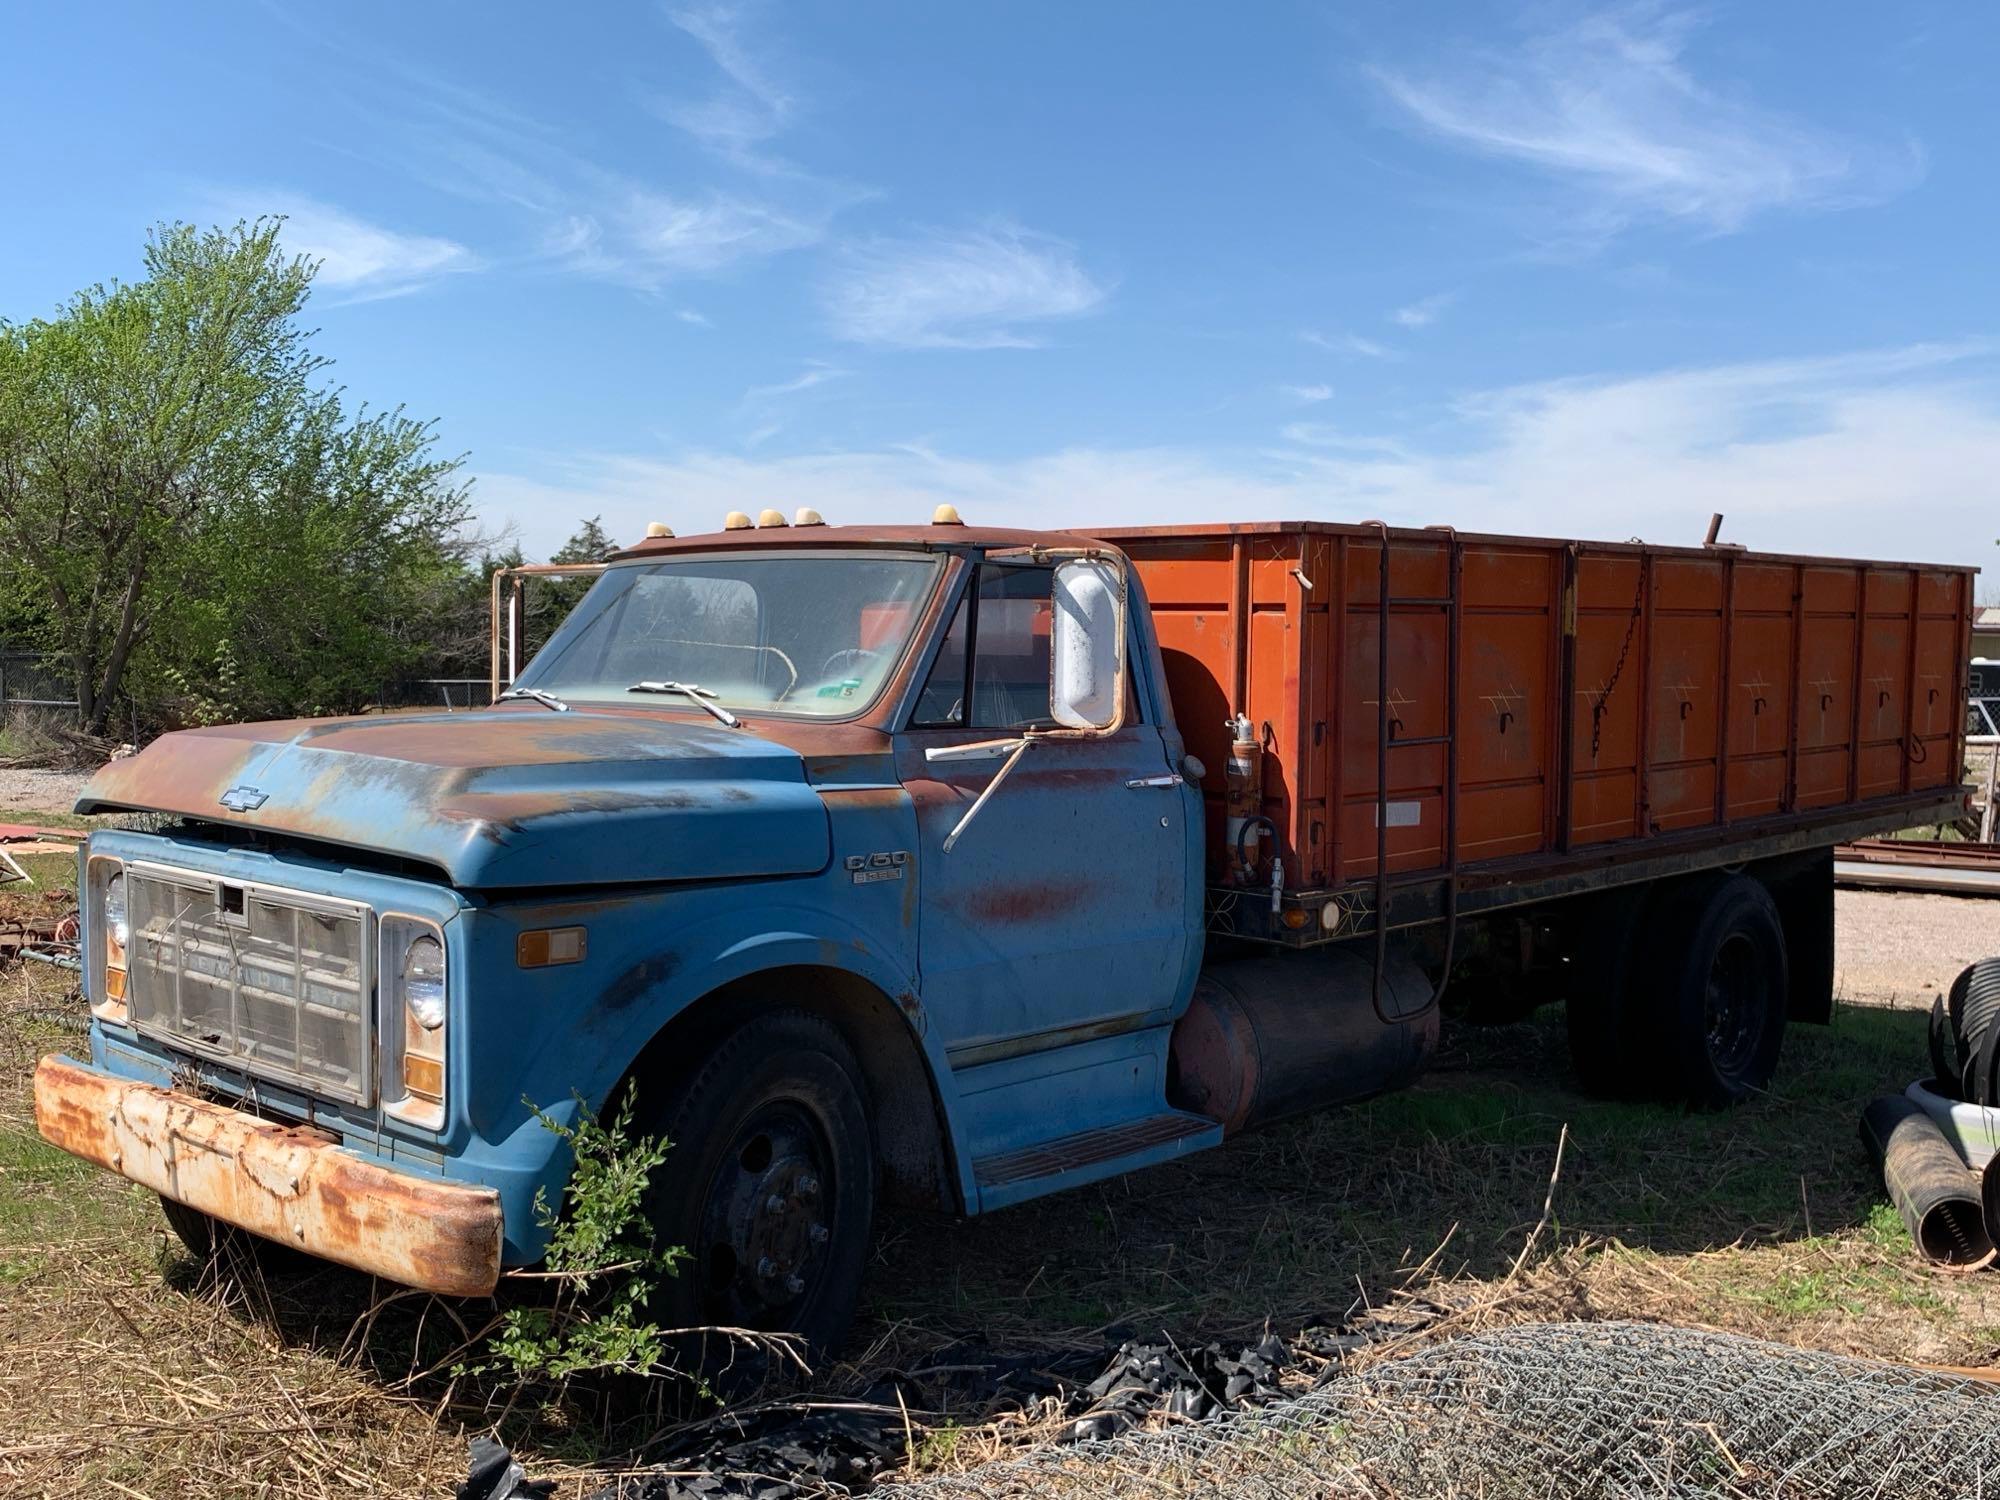 1971 Chevrolet Truck with Dump Bed